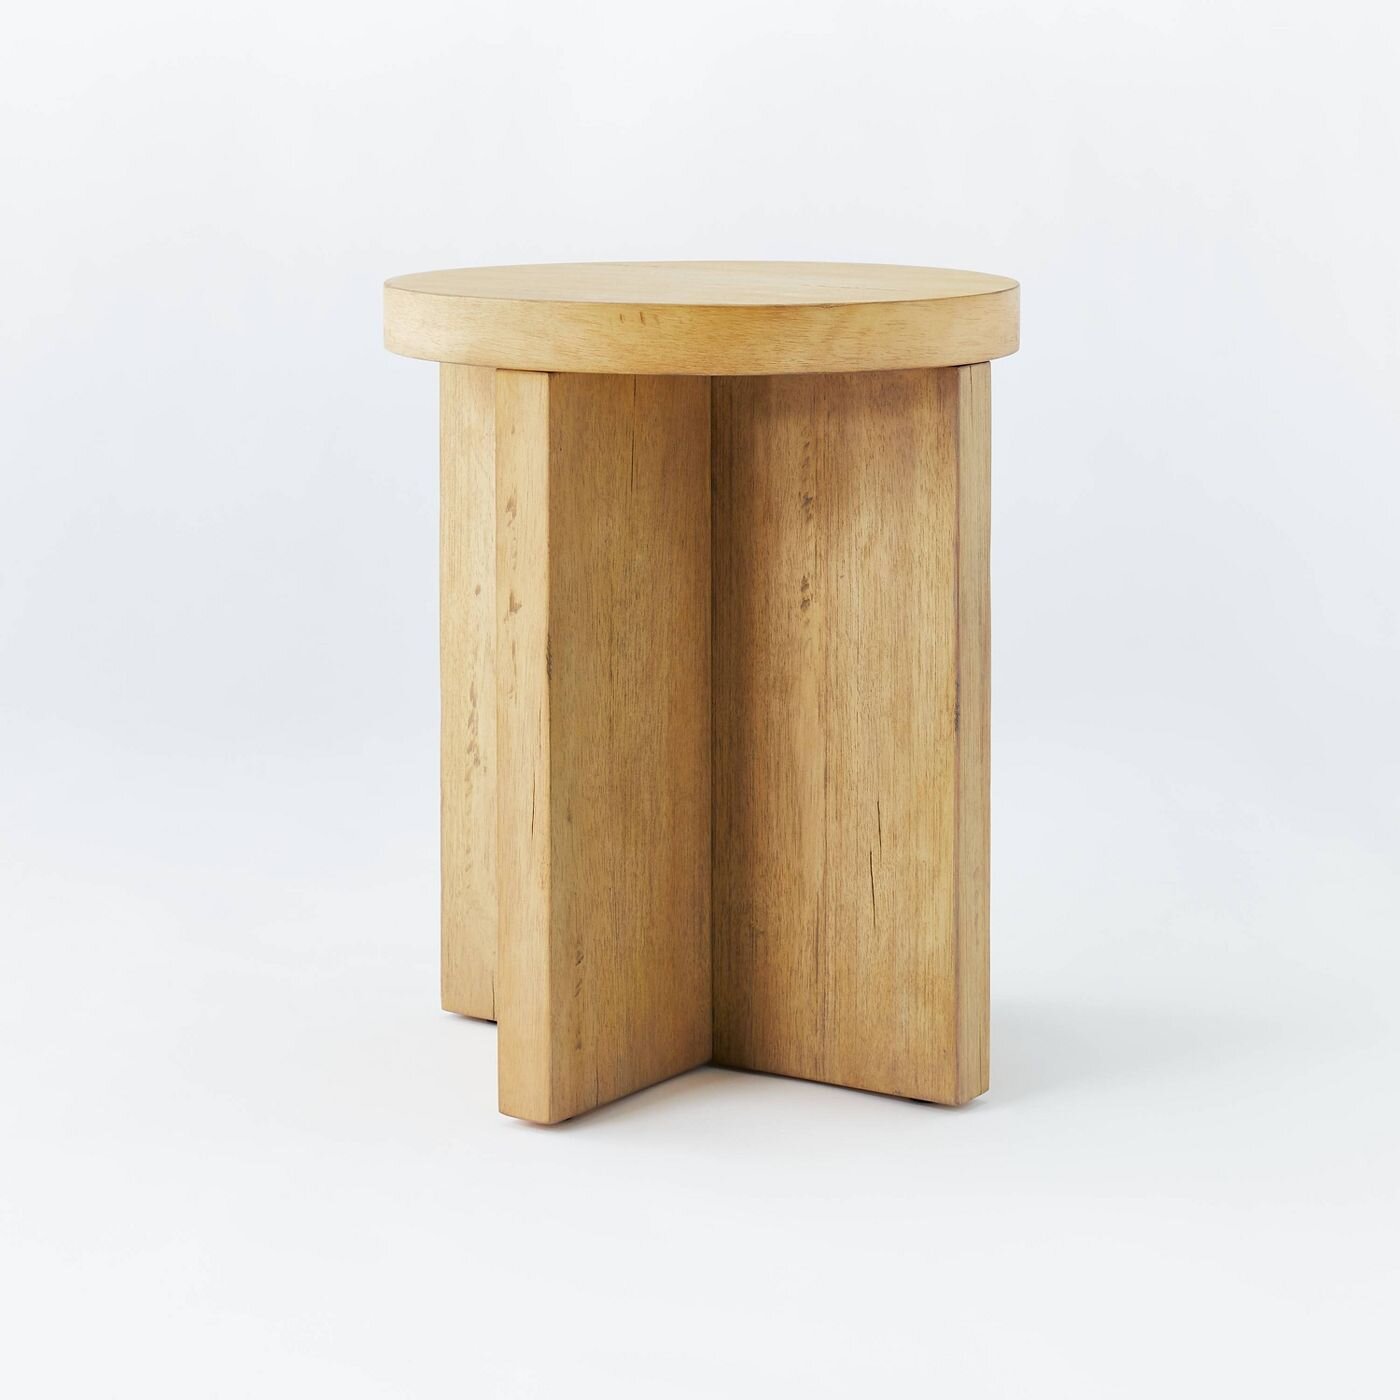 Bluff Park Round Wood Accent Table